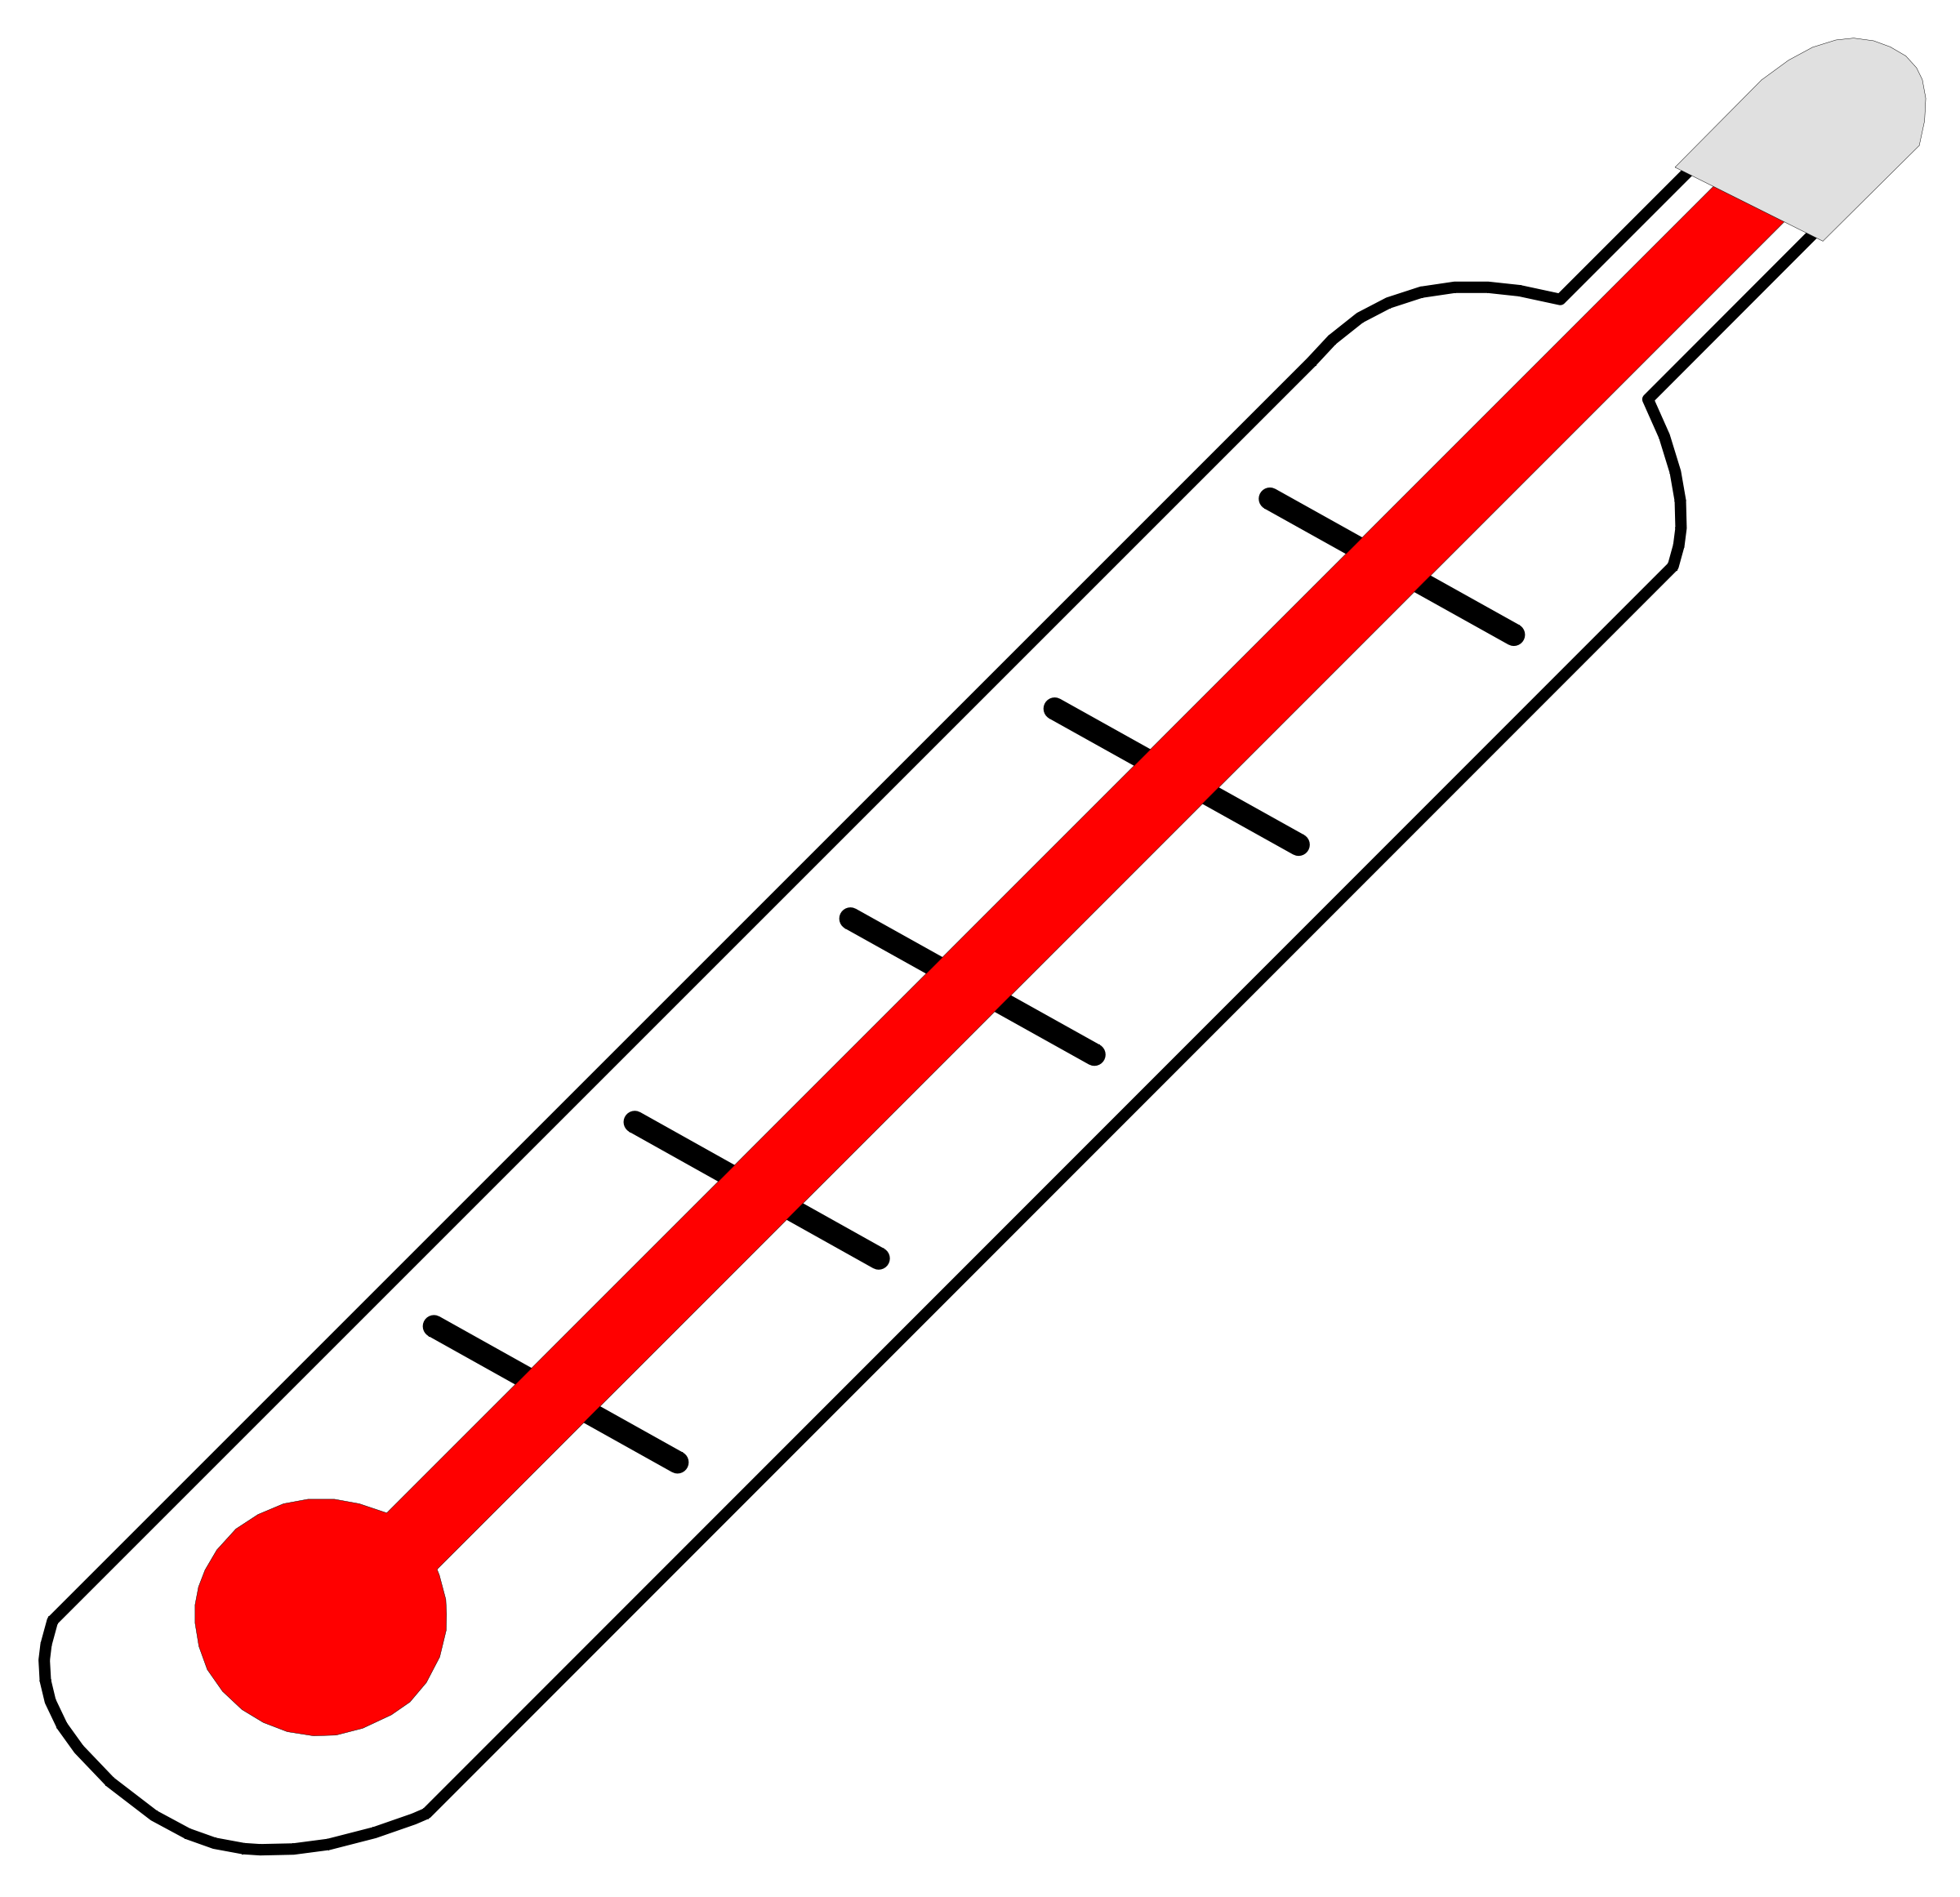 Syringe clipart parallel. Fundraising thermometer clip art